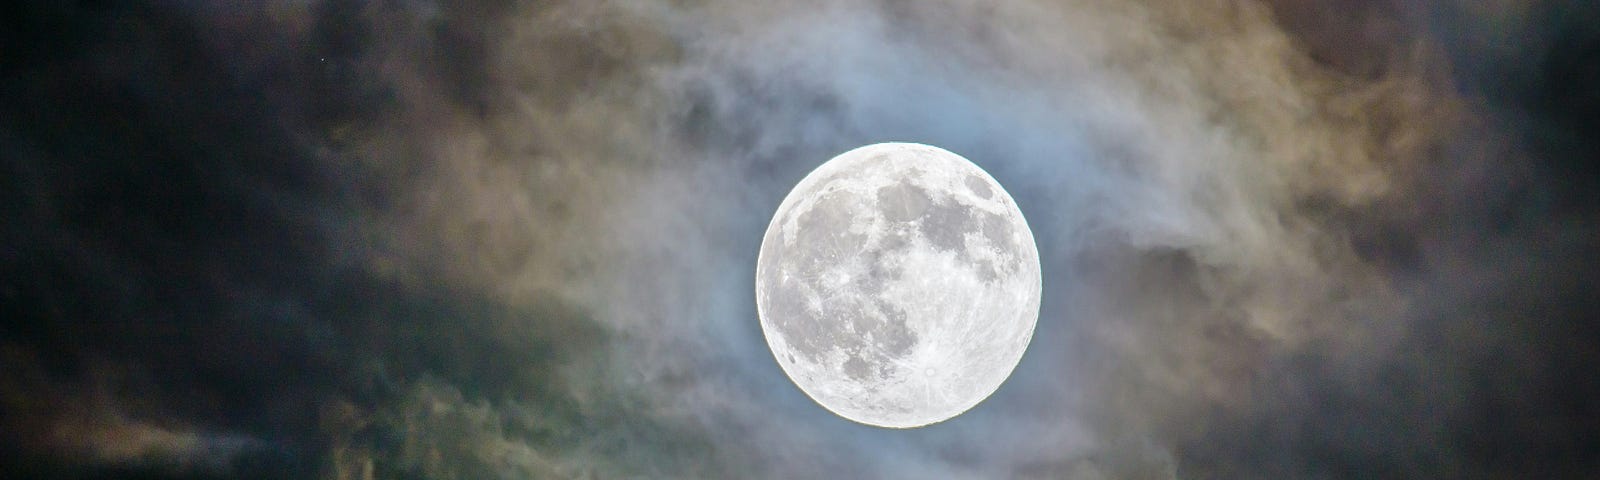 A full moon looks ominous in a cloudy night sky as it breaks through the clouds illuminating its surface.